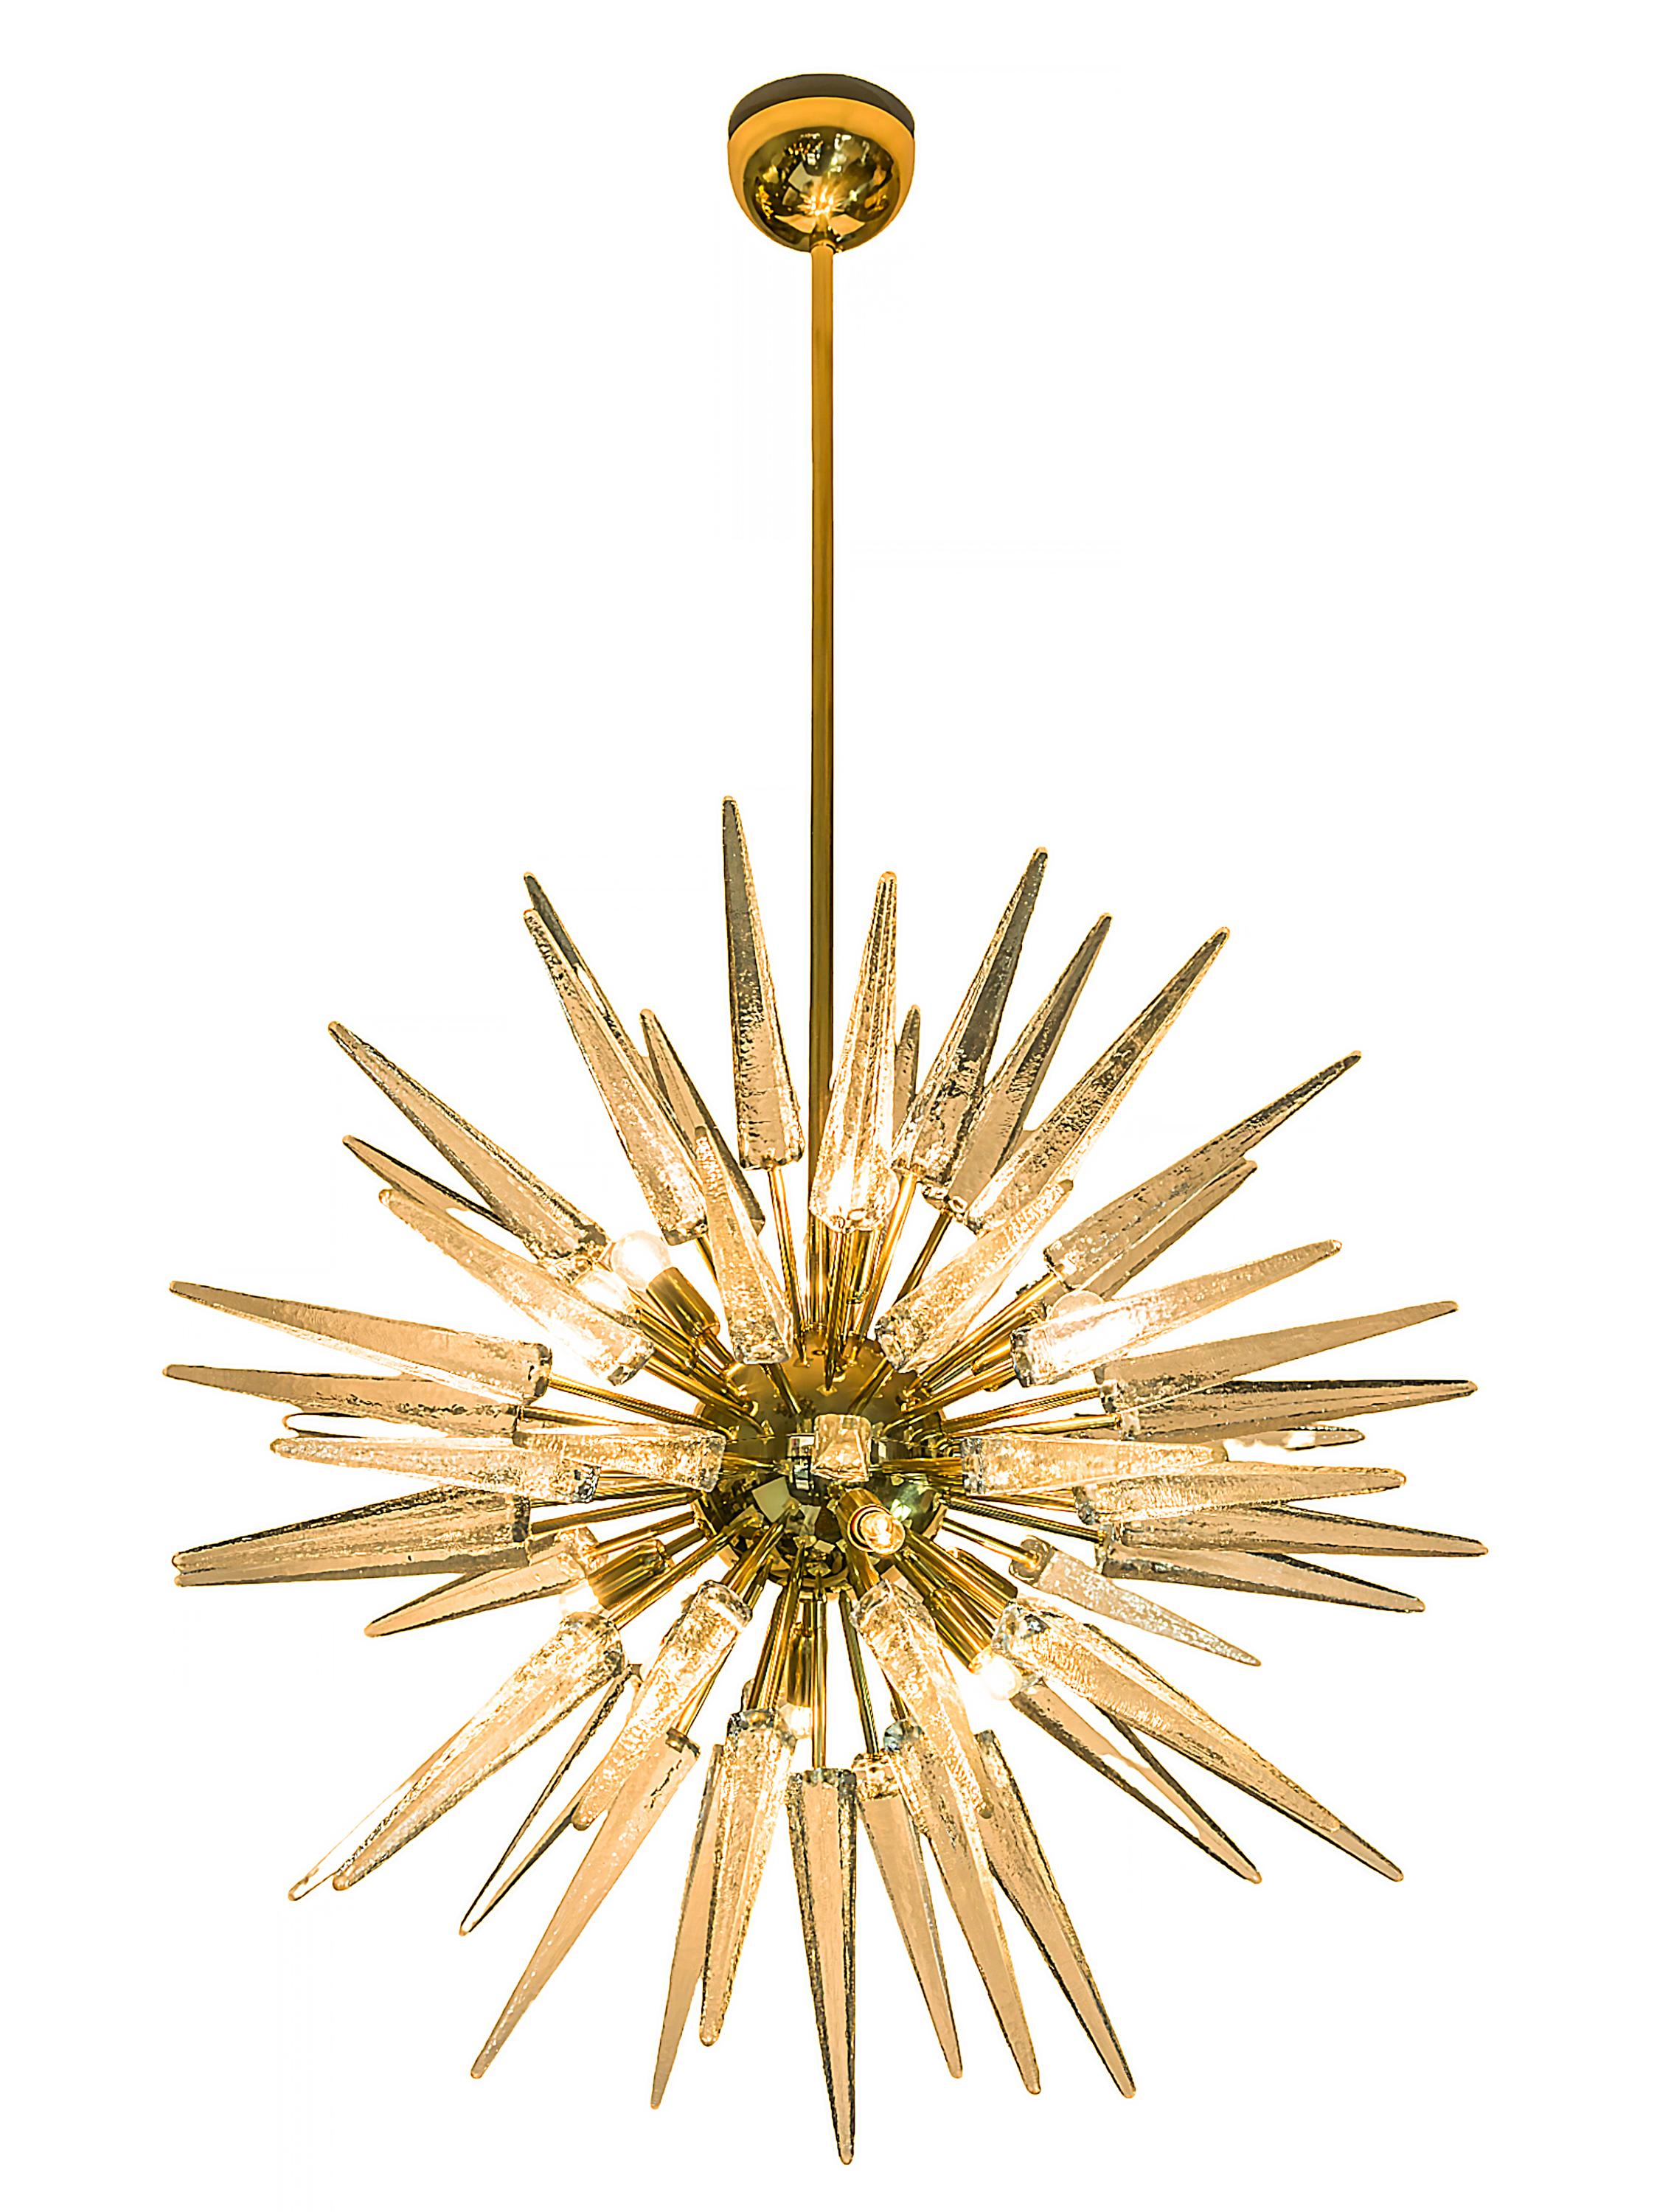 Italian handmade Murano glass sputnik chandelier.
The base of this chandelier is in brass, decorated with handmade solid Murano glass details in the form of ice icicle.
This chandelier includes 12 pieces E14 bulbs.
Very good/excellent vintage